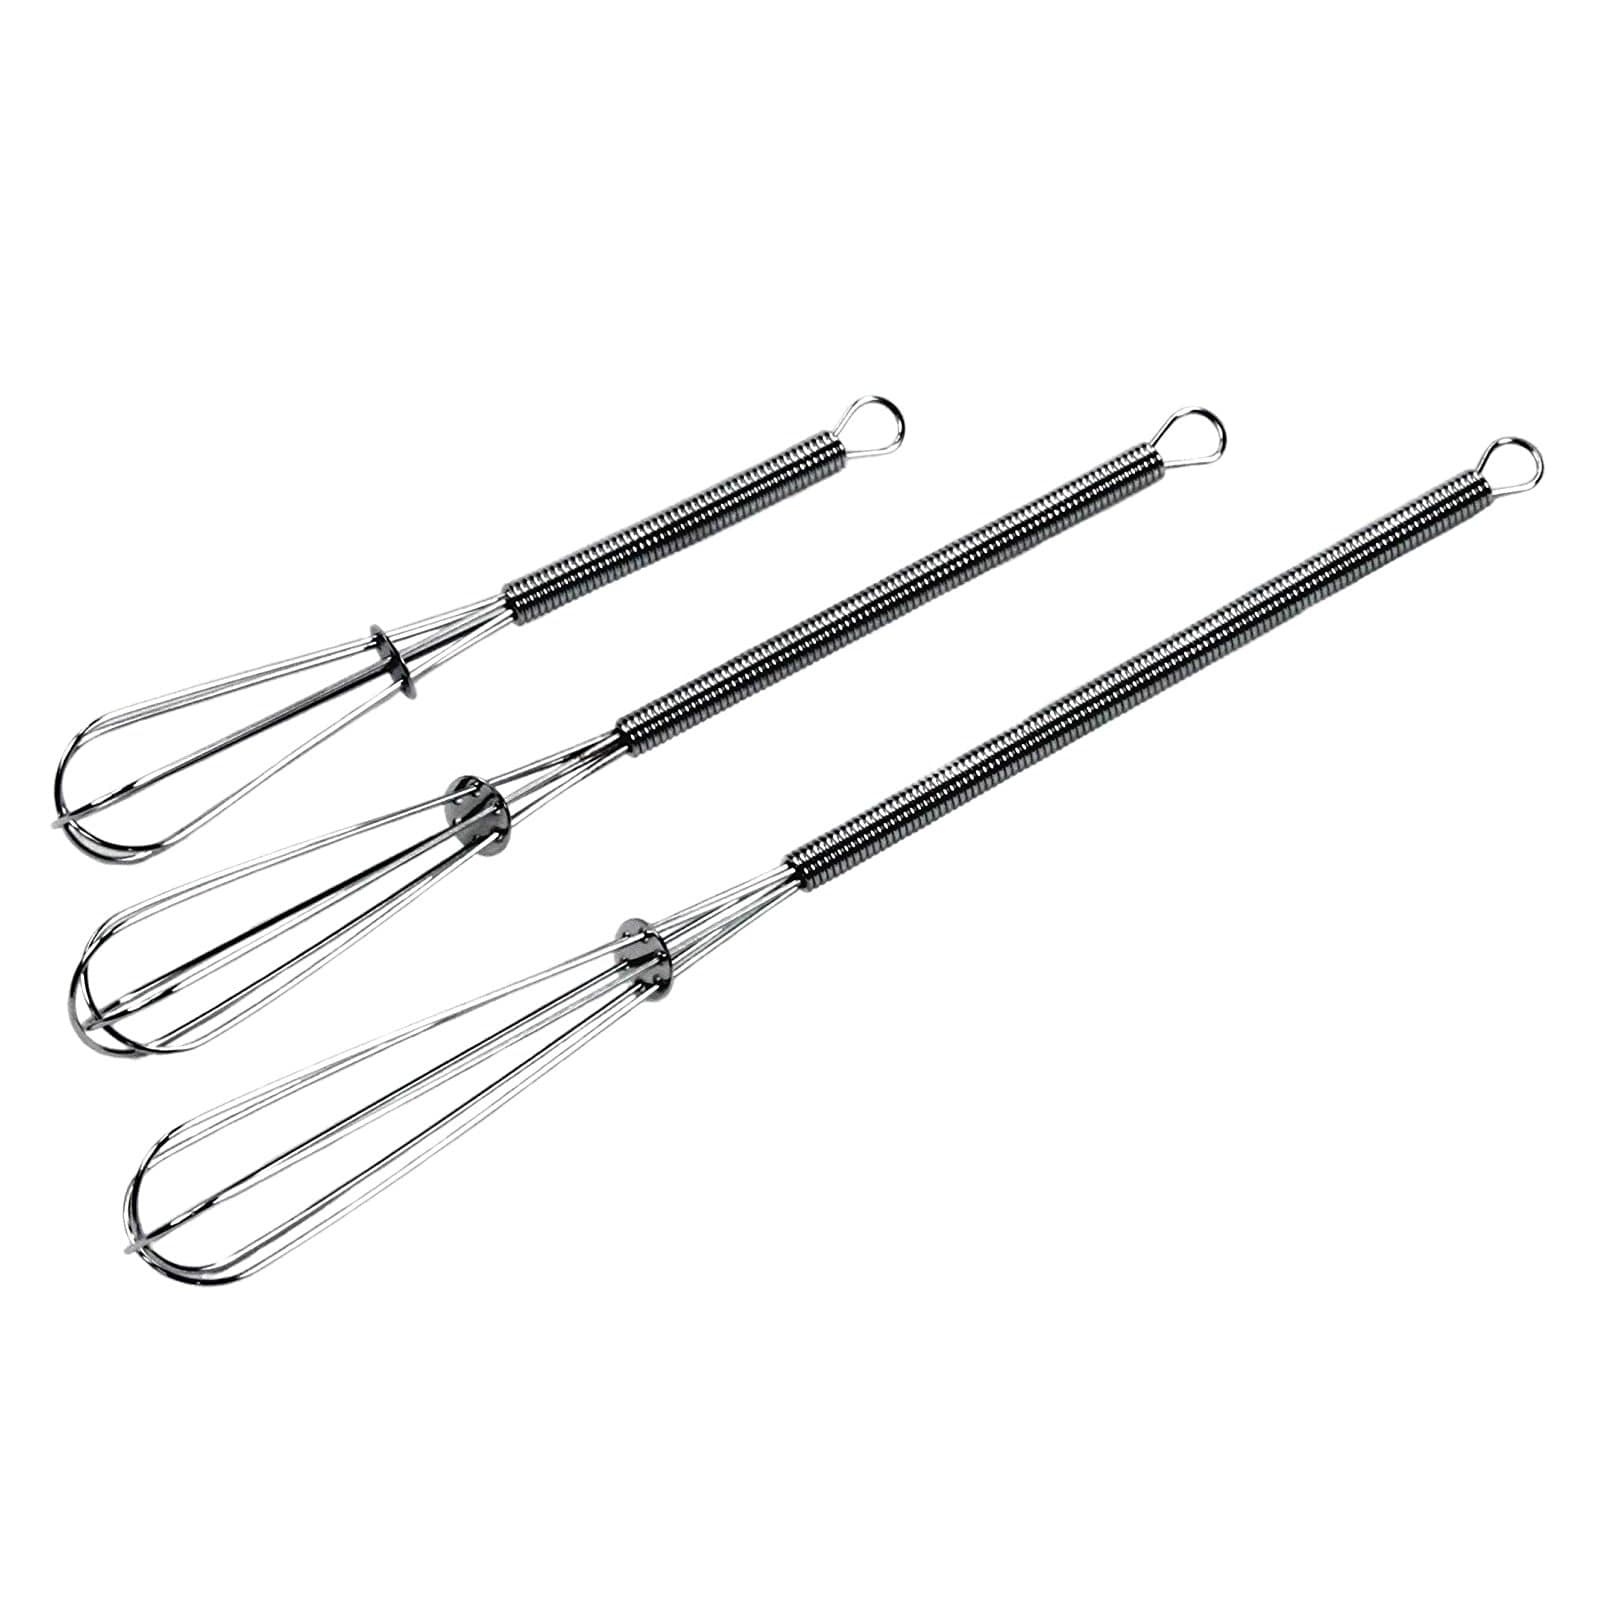 https://ak1.ostkcdn.com/images/products/is/images/direct/c38532a543e1fd5fda0a0eb755f2a6b47763fb08/Chef-Craft-3pc-Chrome-Plated-Steel-Mini-Whisk-Set---Great-for-Sauces%2C-Dressing%2C-Eggs-and-More.jpg